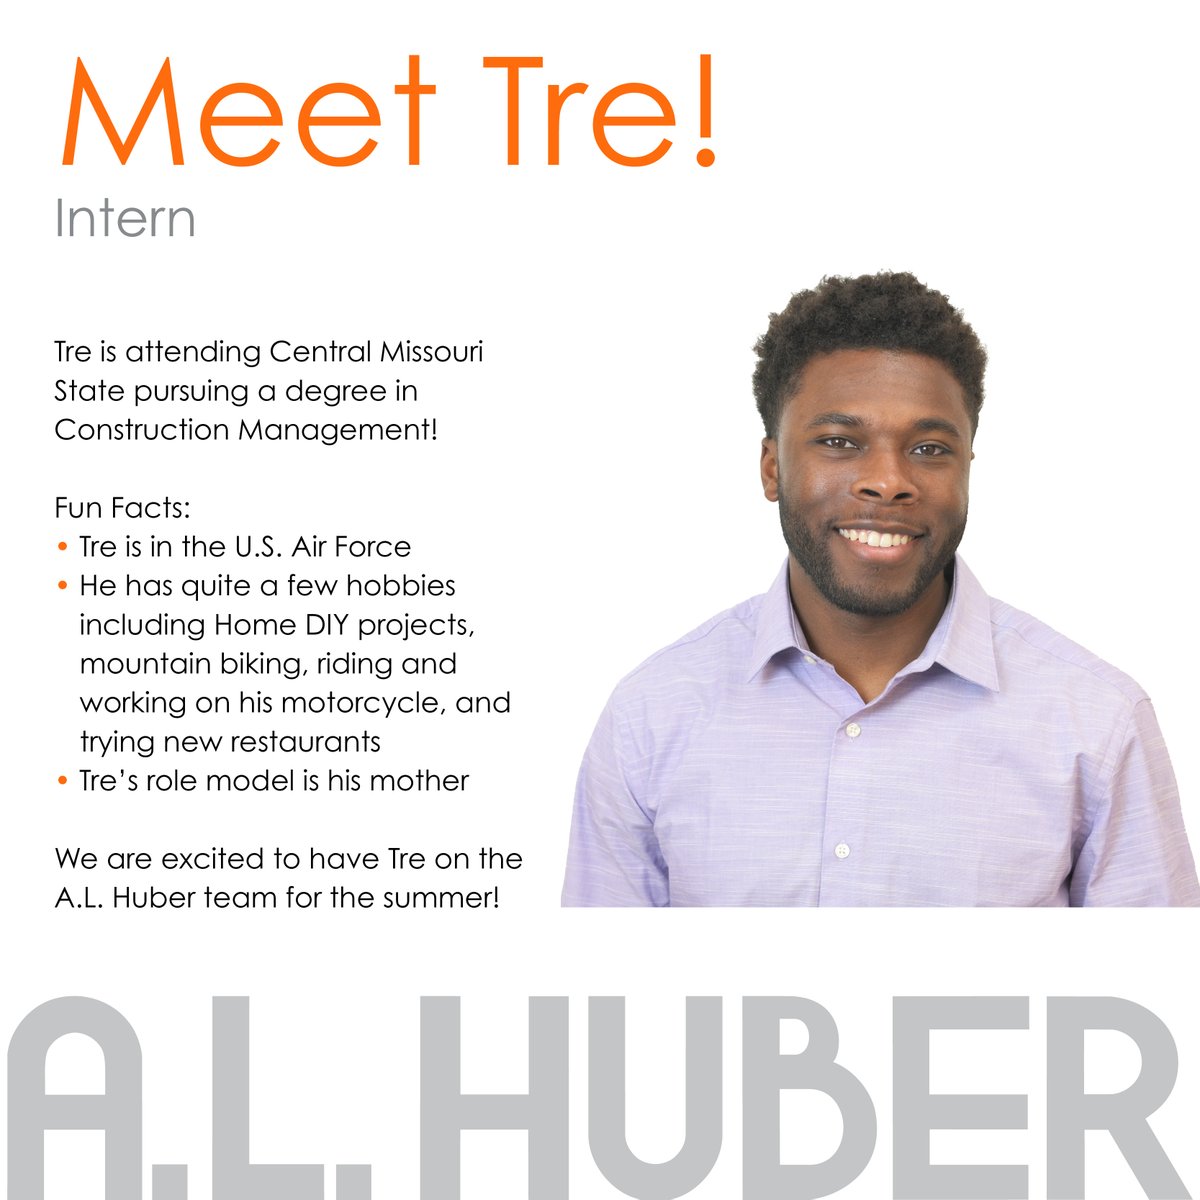 We are thrilled to have Tre on our team for the summer! He will be working through our various departments learning about the different paths in construction.

#SummerIntern #ALHuber #ConstructionIntern